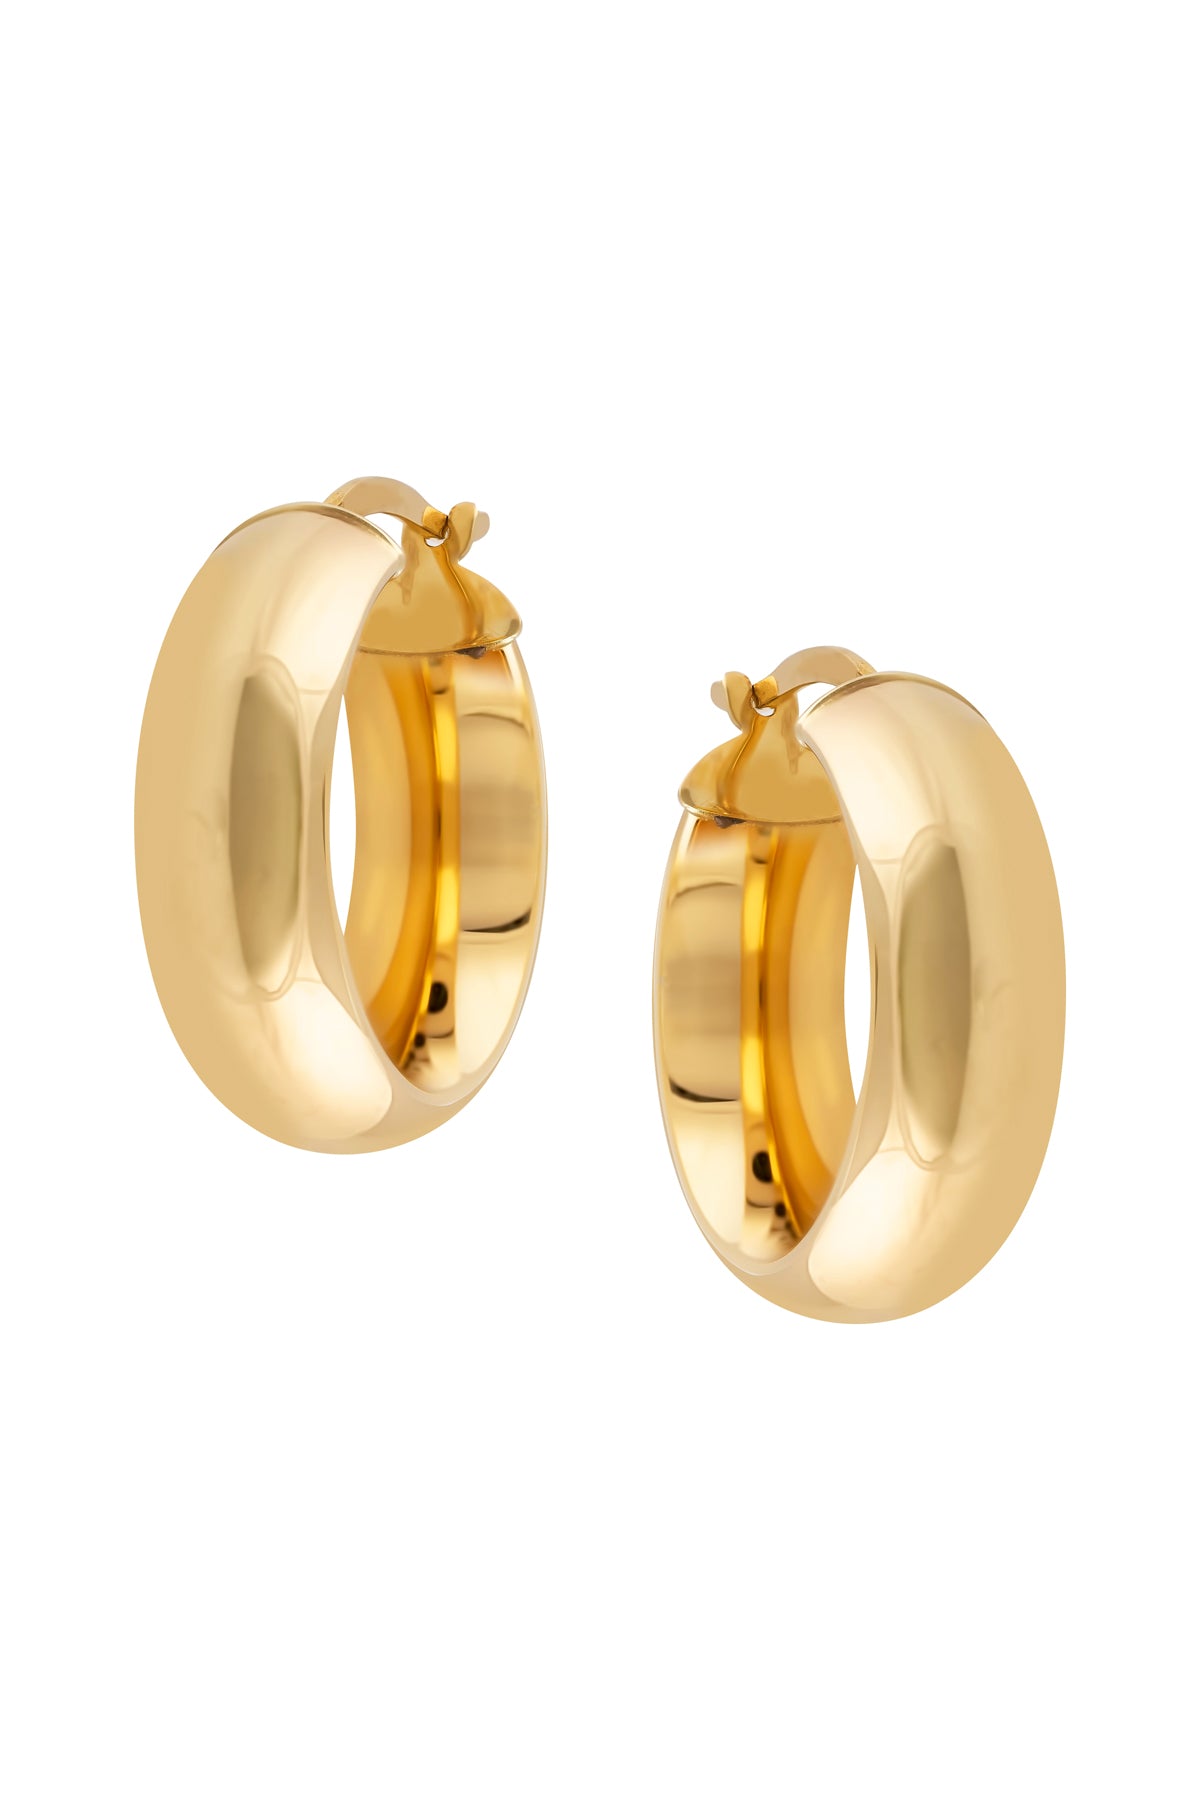 9 Carat Yellow Gold Thick Hoop Earrings from LeGassick Jewellery.